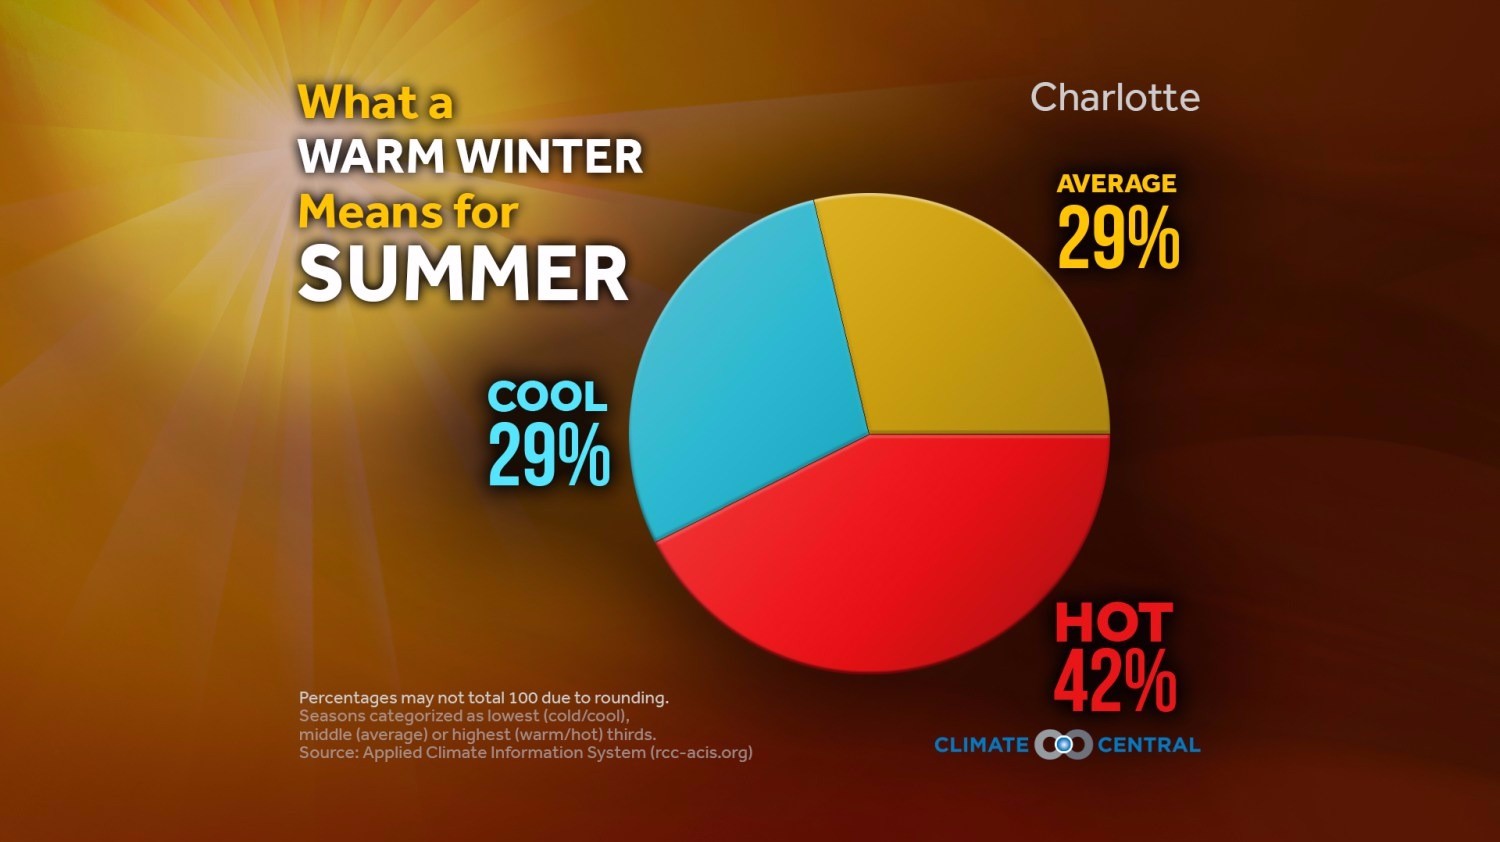 Does the warm winter mean a hot summer is coming?